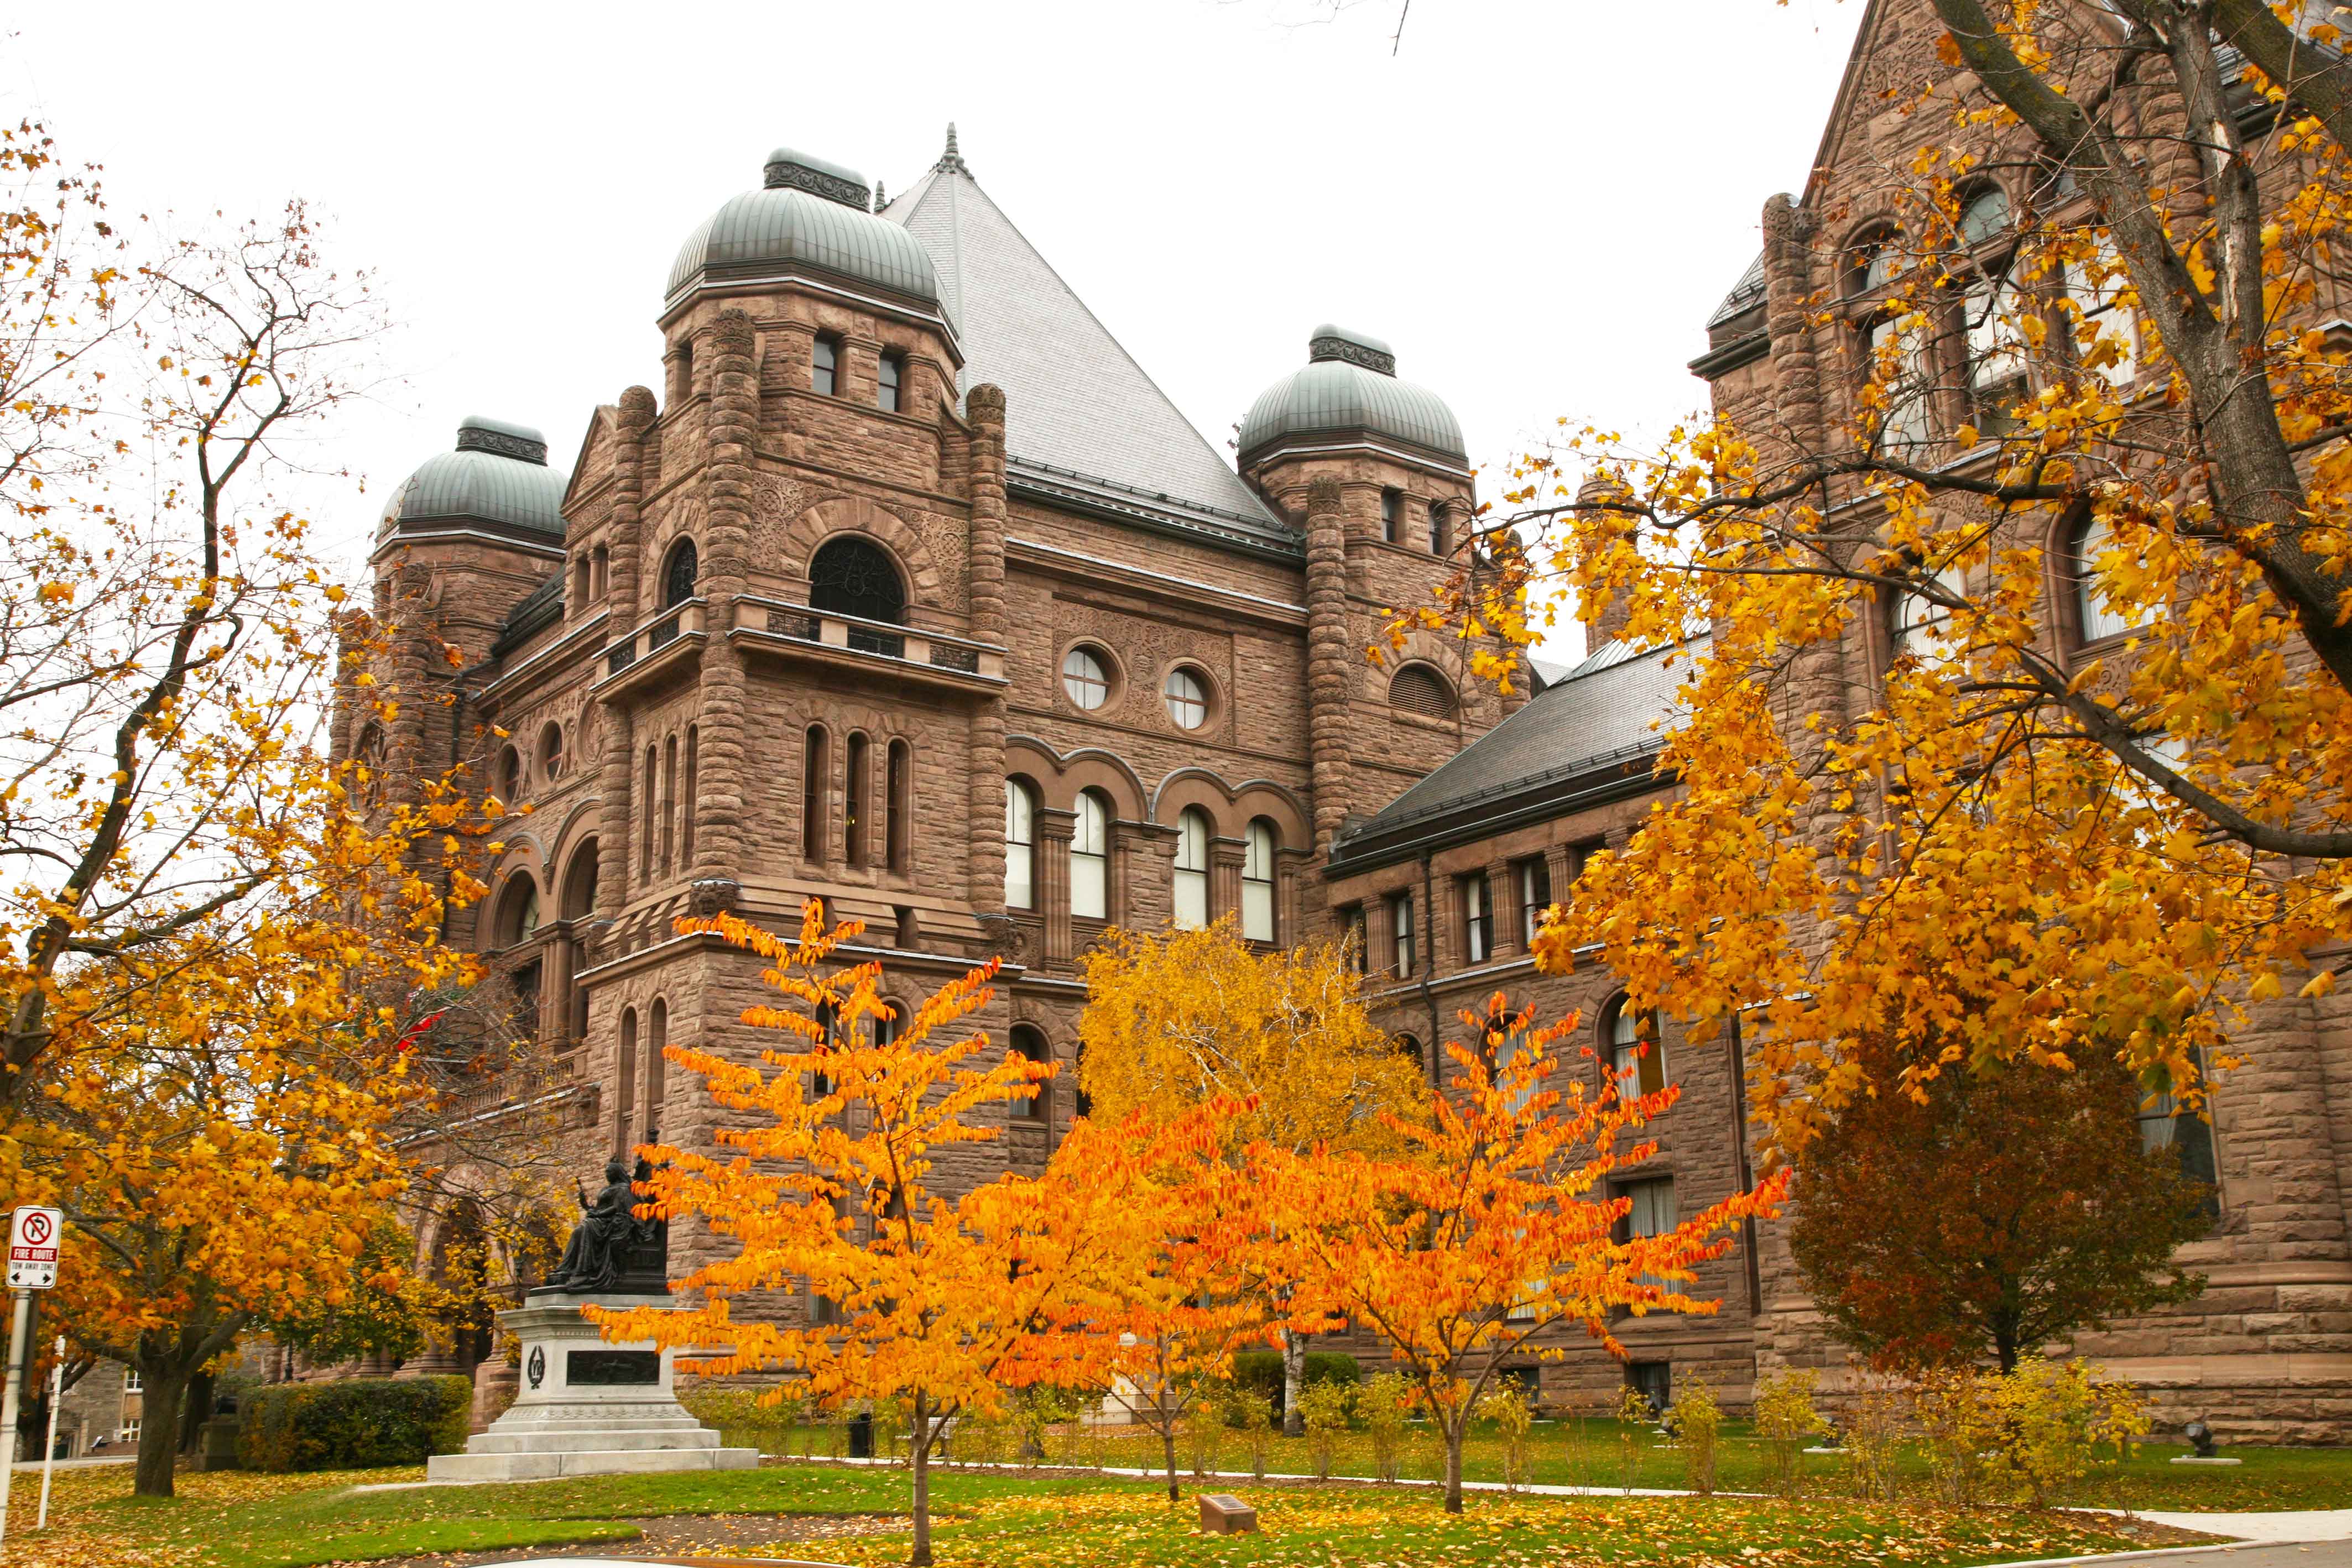 The Legislative building exterior in the fall surrounded by orange foliage.